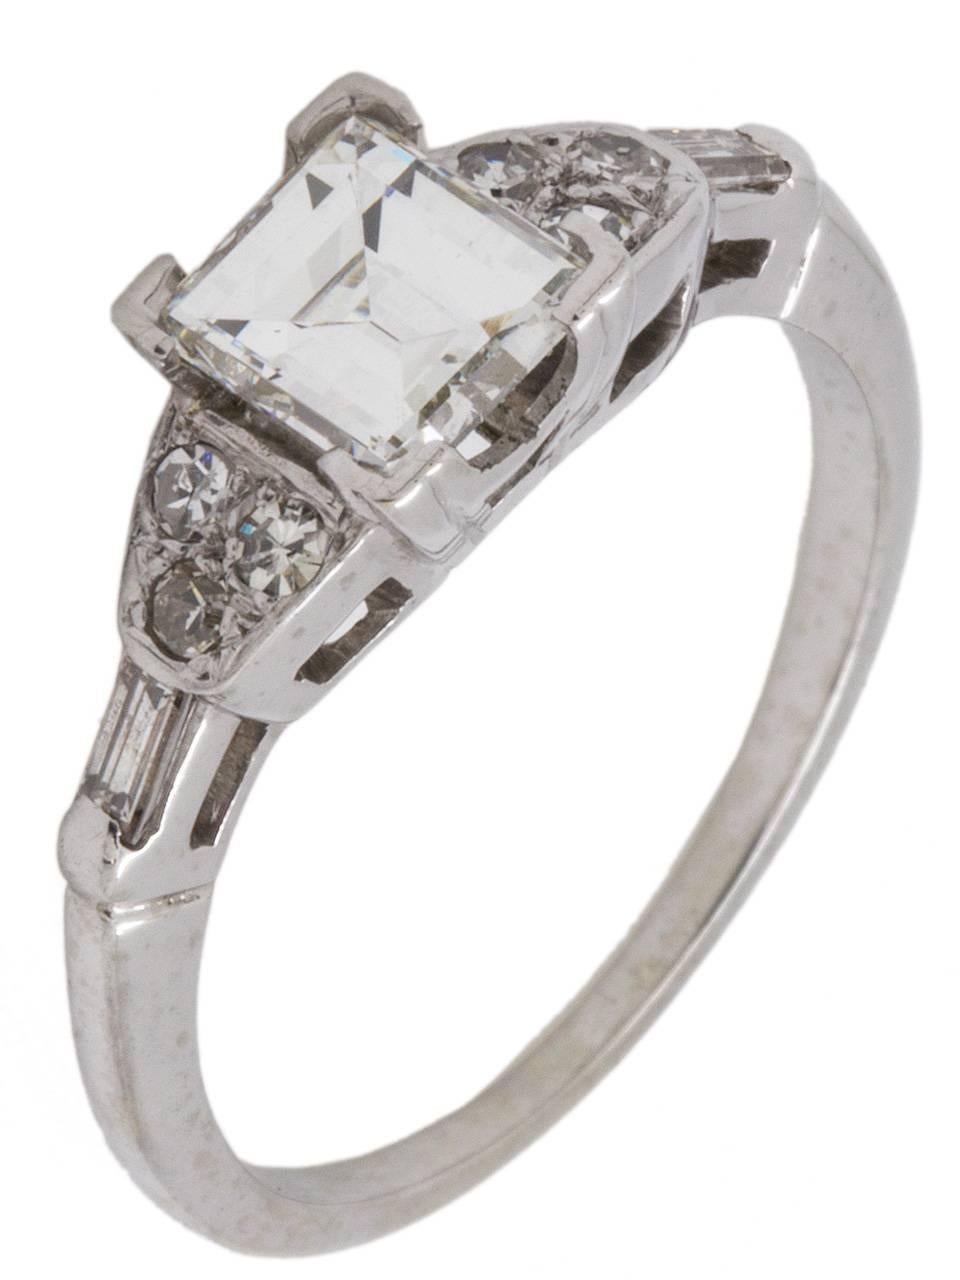 Gorgeous 14K white gold diamond engagement ring set with a very bright and lively EGL certified 1.02 carat step cut center stone, H /VS2, flanked by two bar-set baguettes and six round single cut diamonds set in a floral motif which weigh